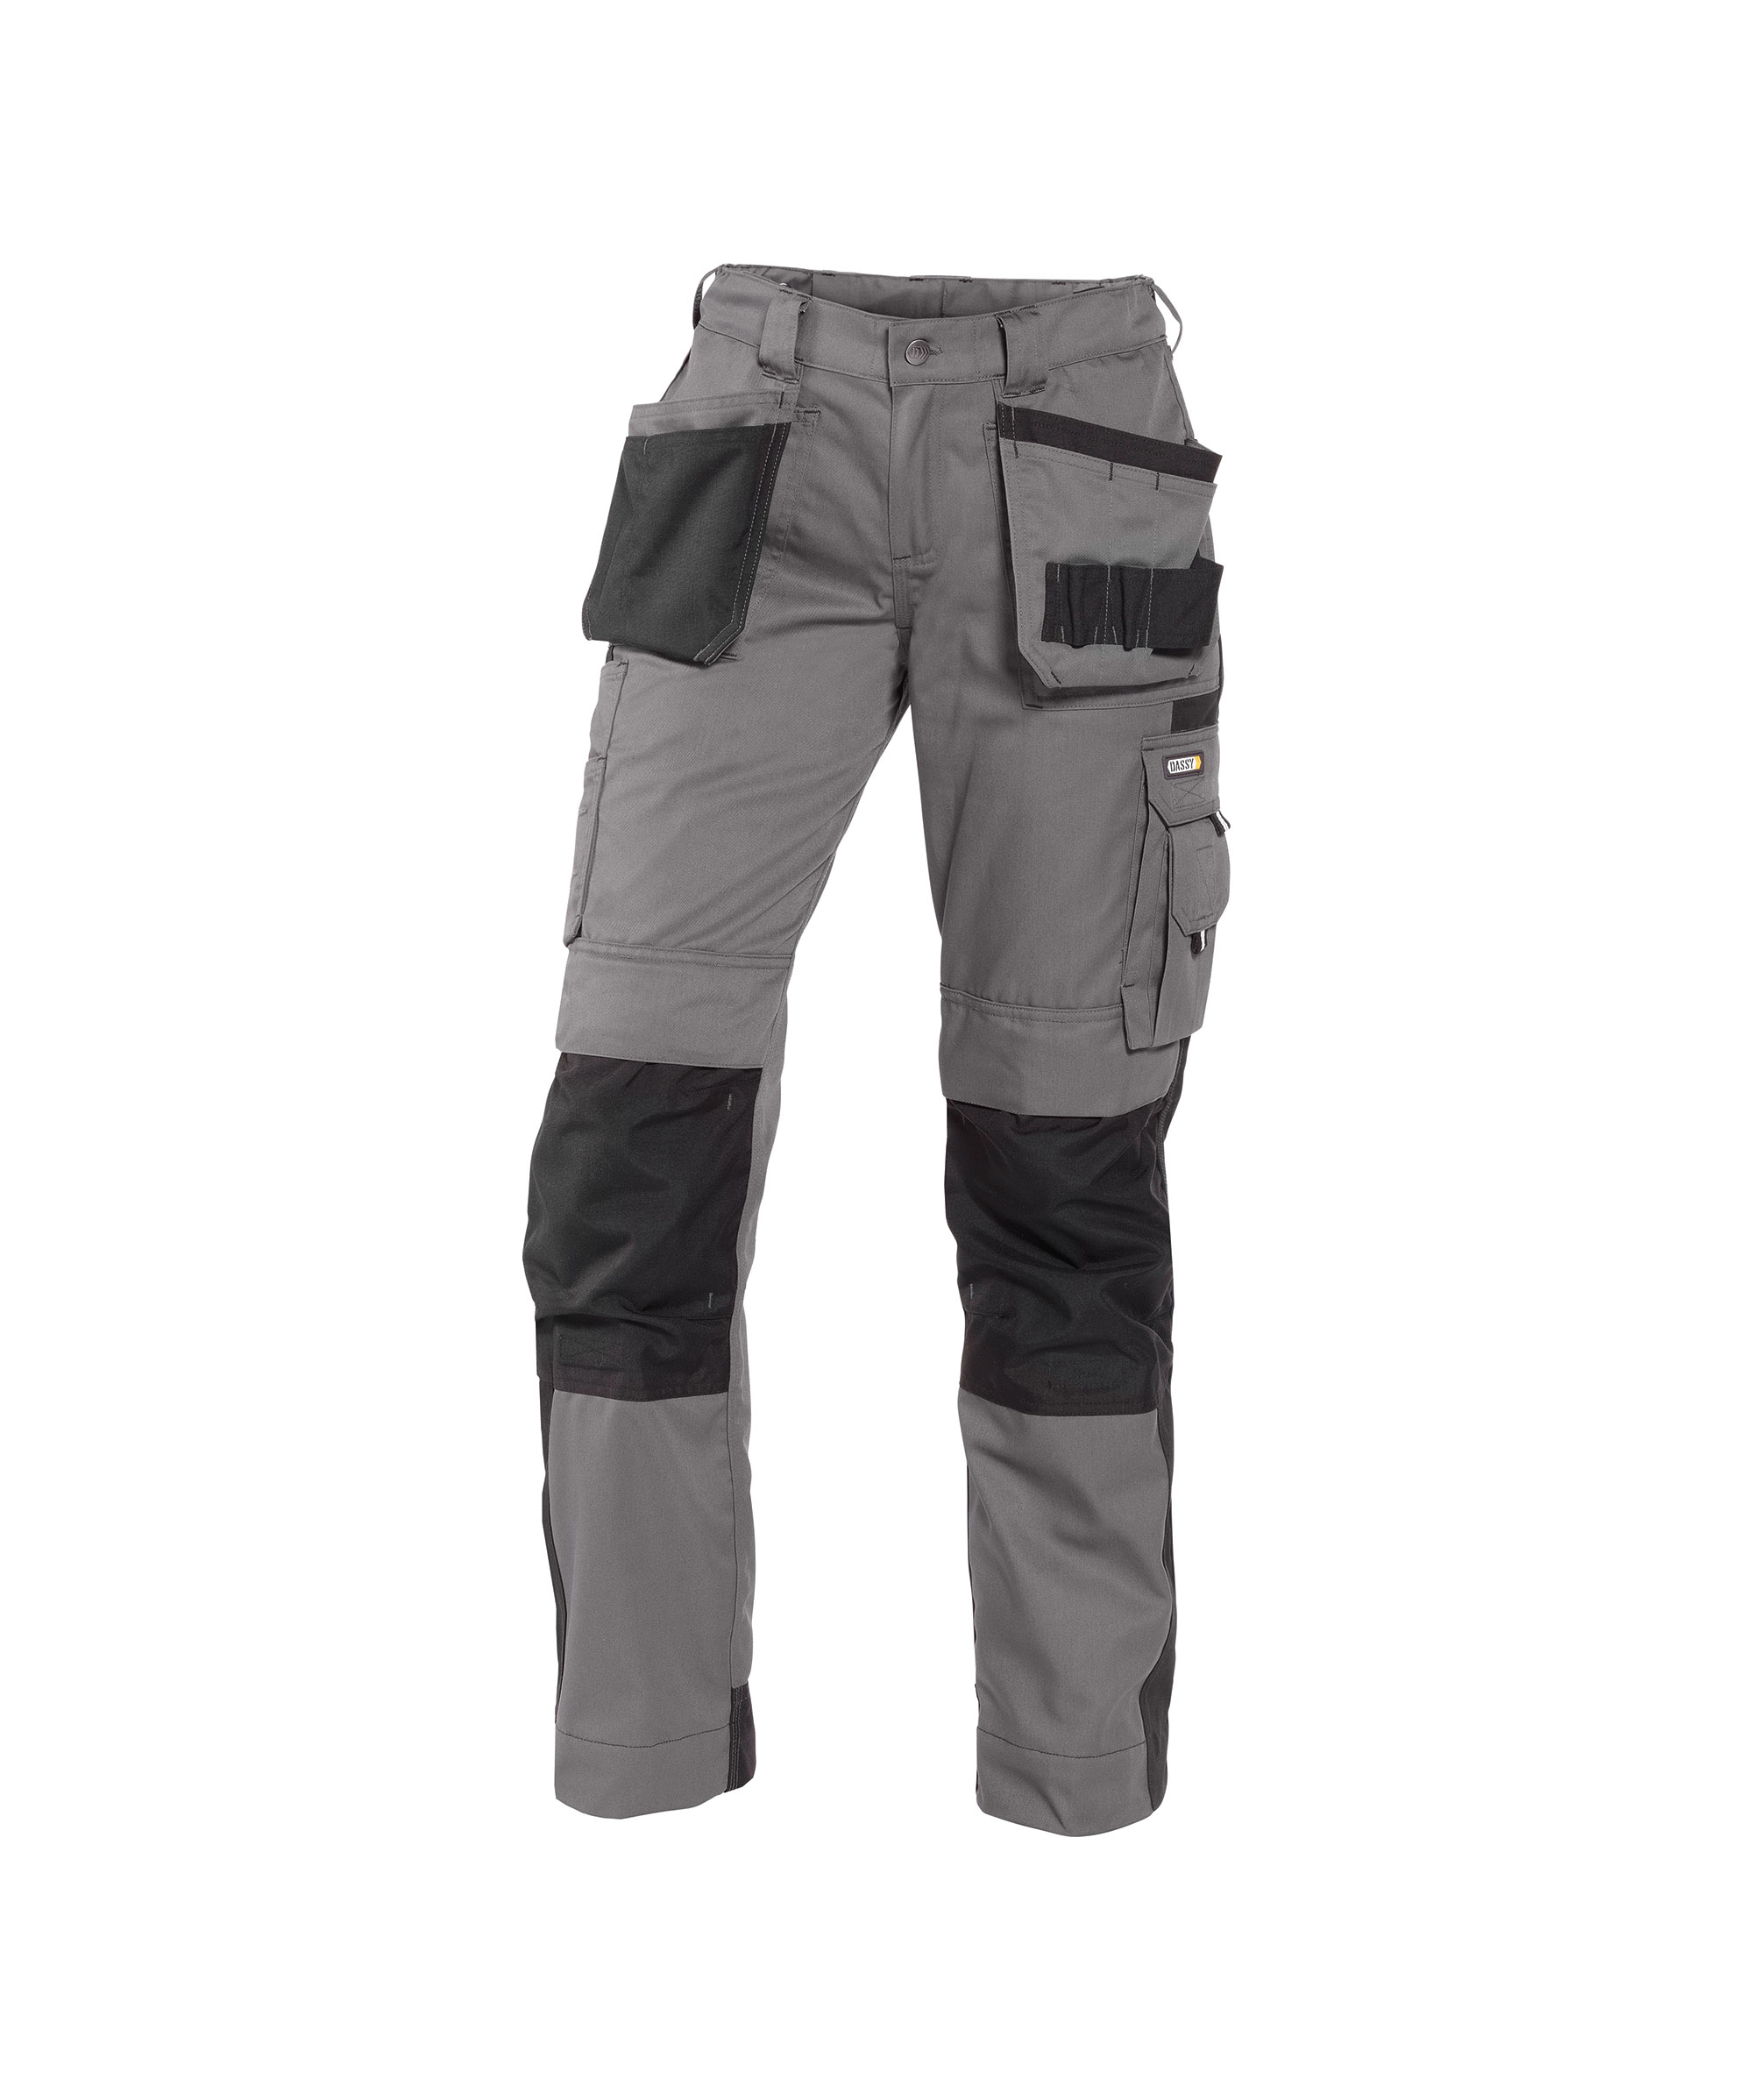 seattle-women_two-tone-work-trousers-with-multi-pockets-and-knee-pockets_cement-grey-black_front.jpg